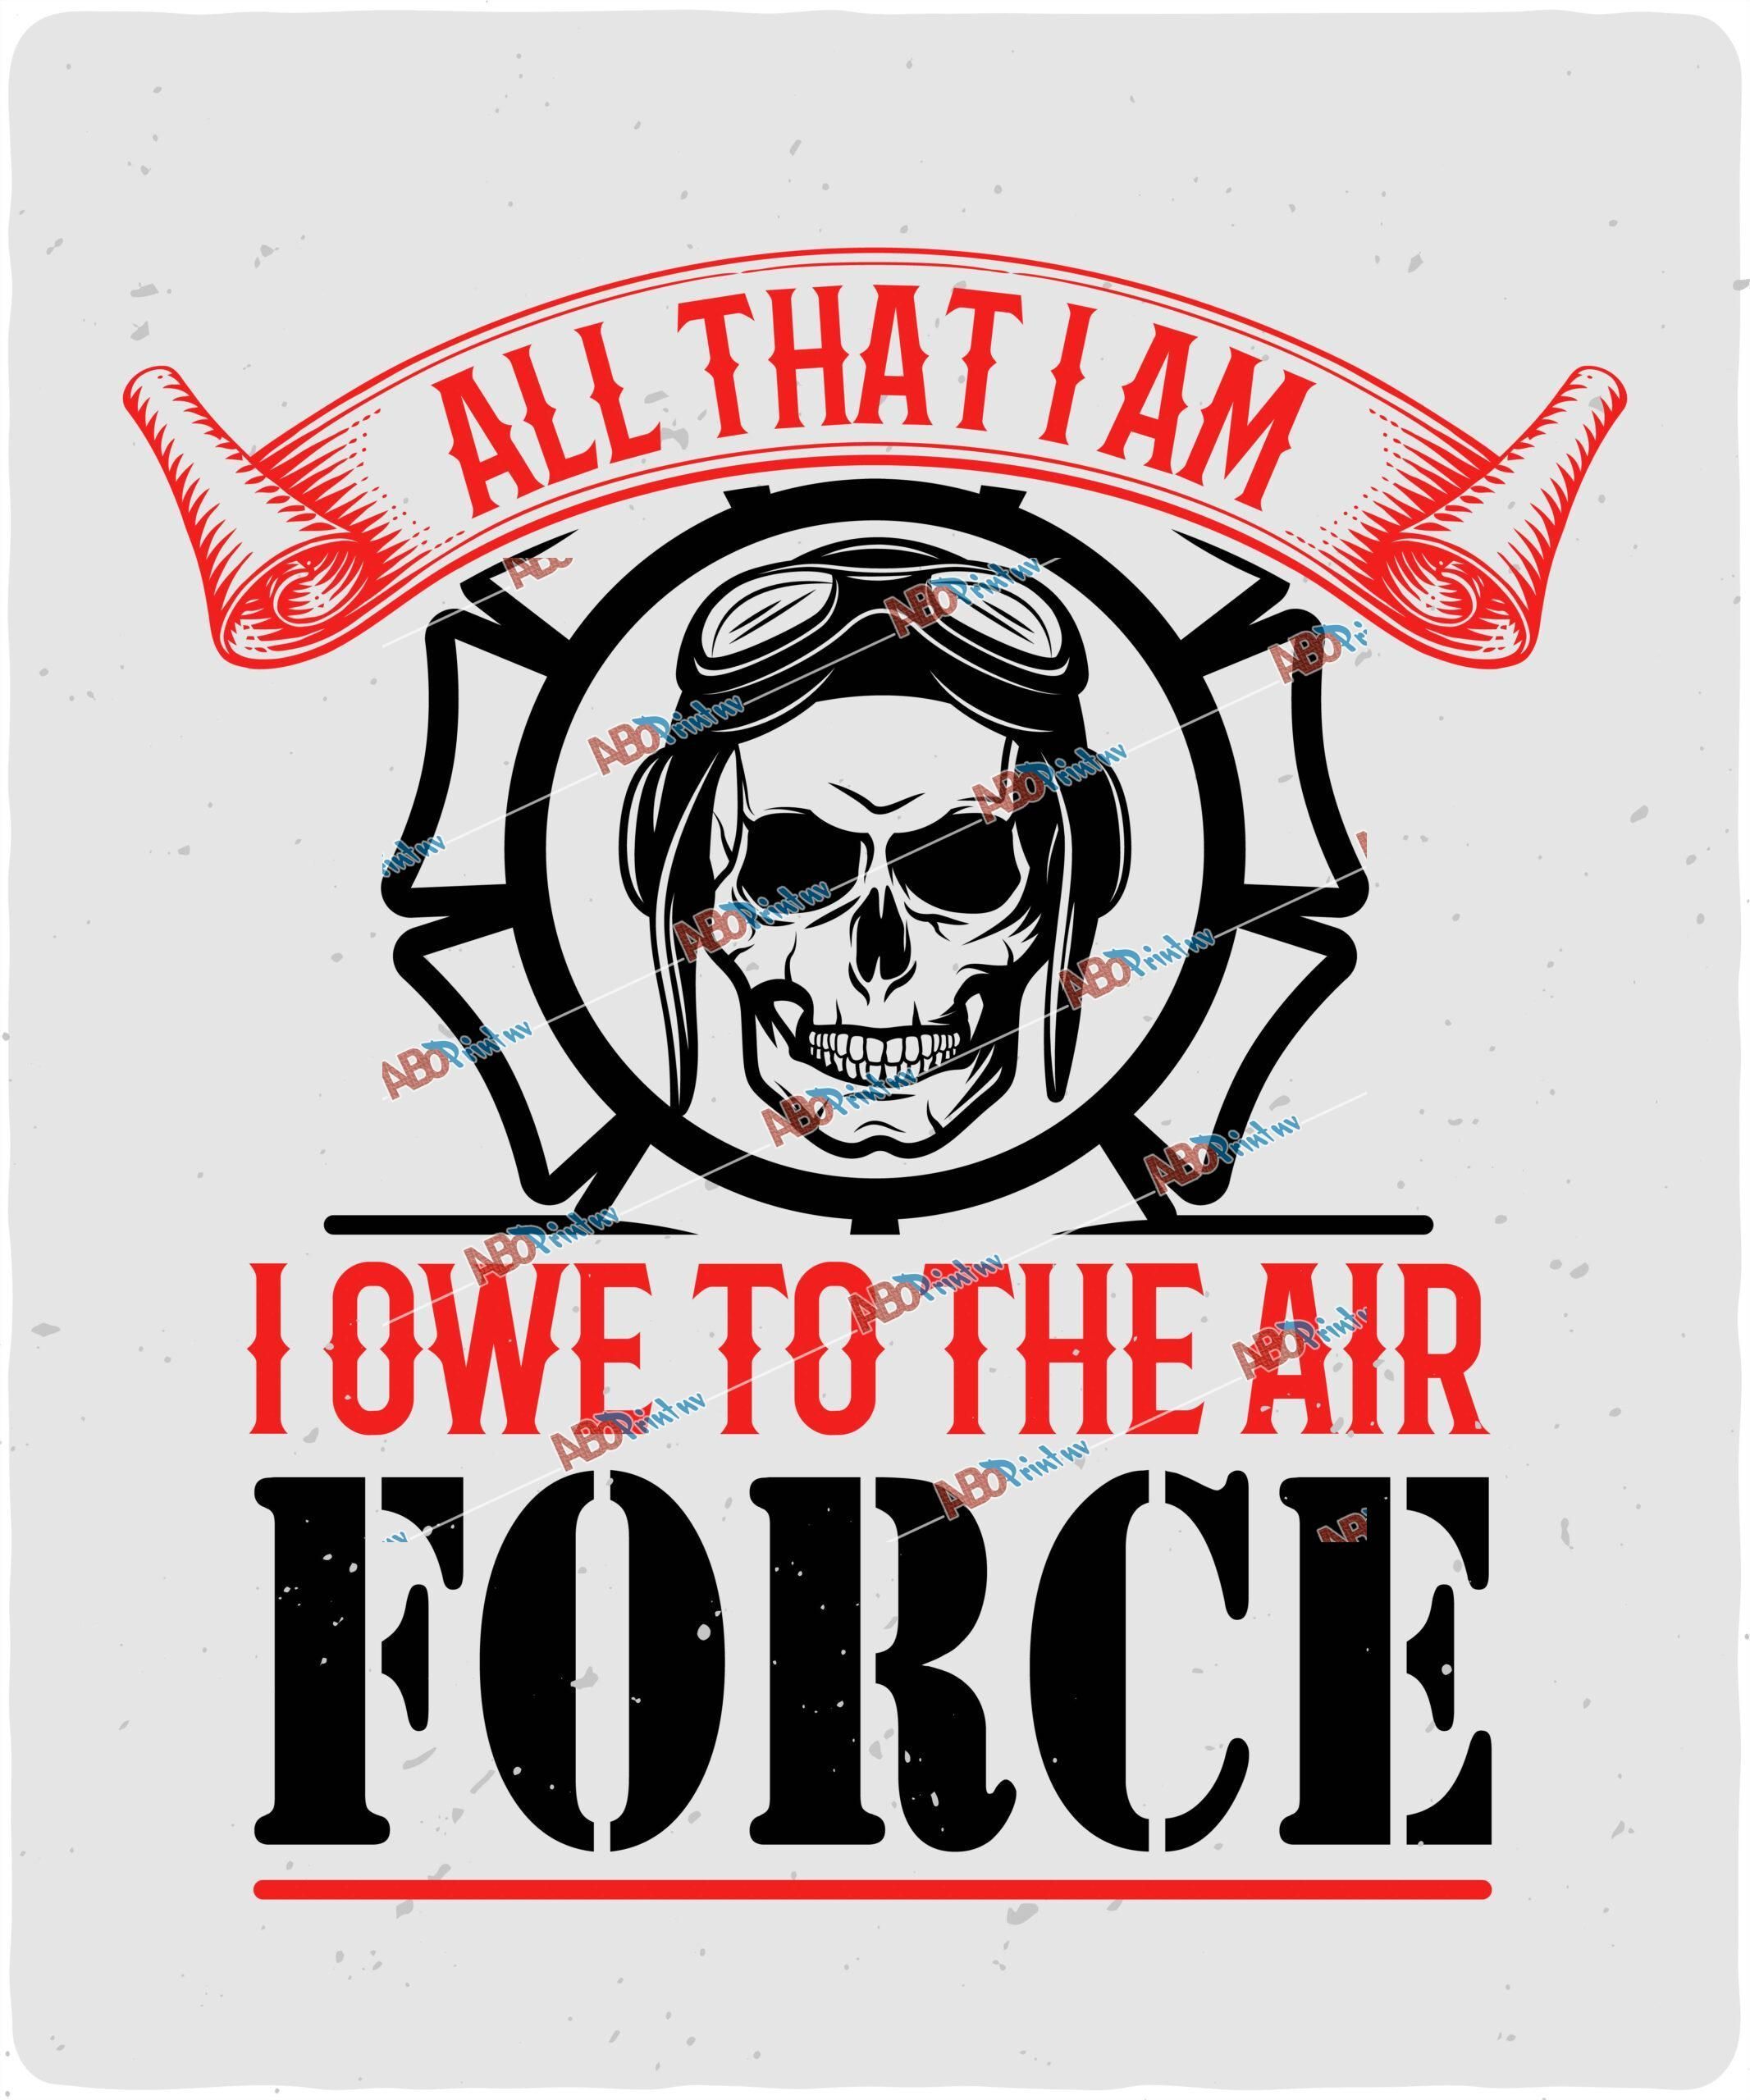 All that I am.  I owe to the Air Force